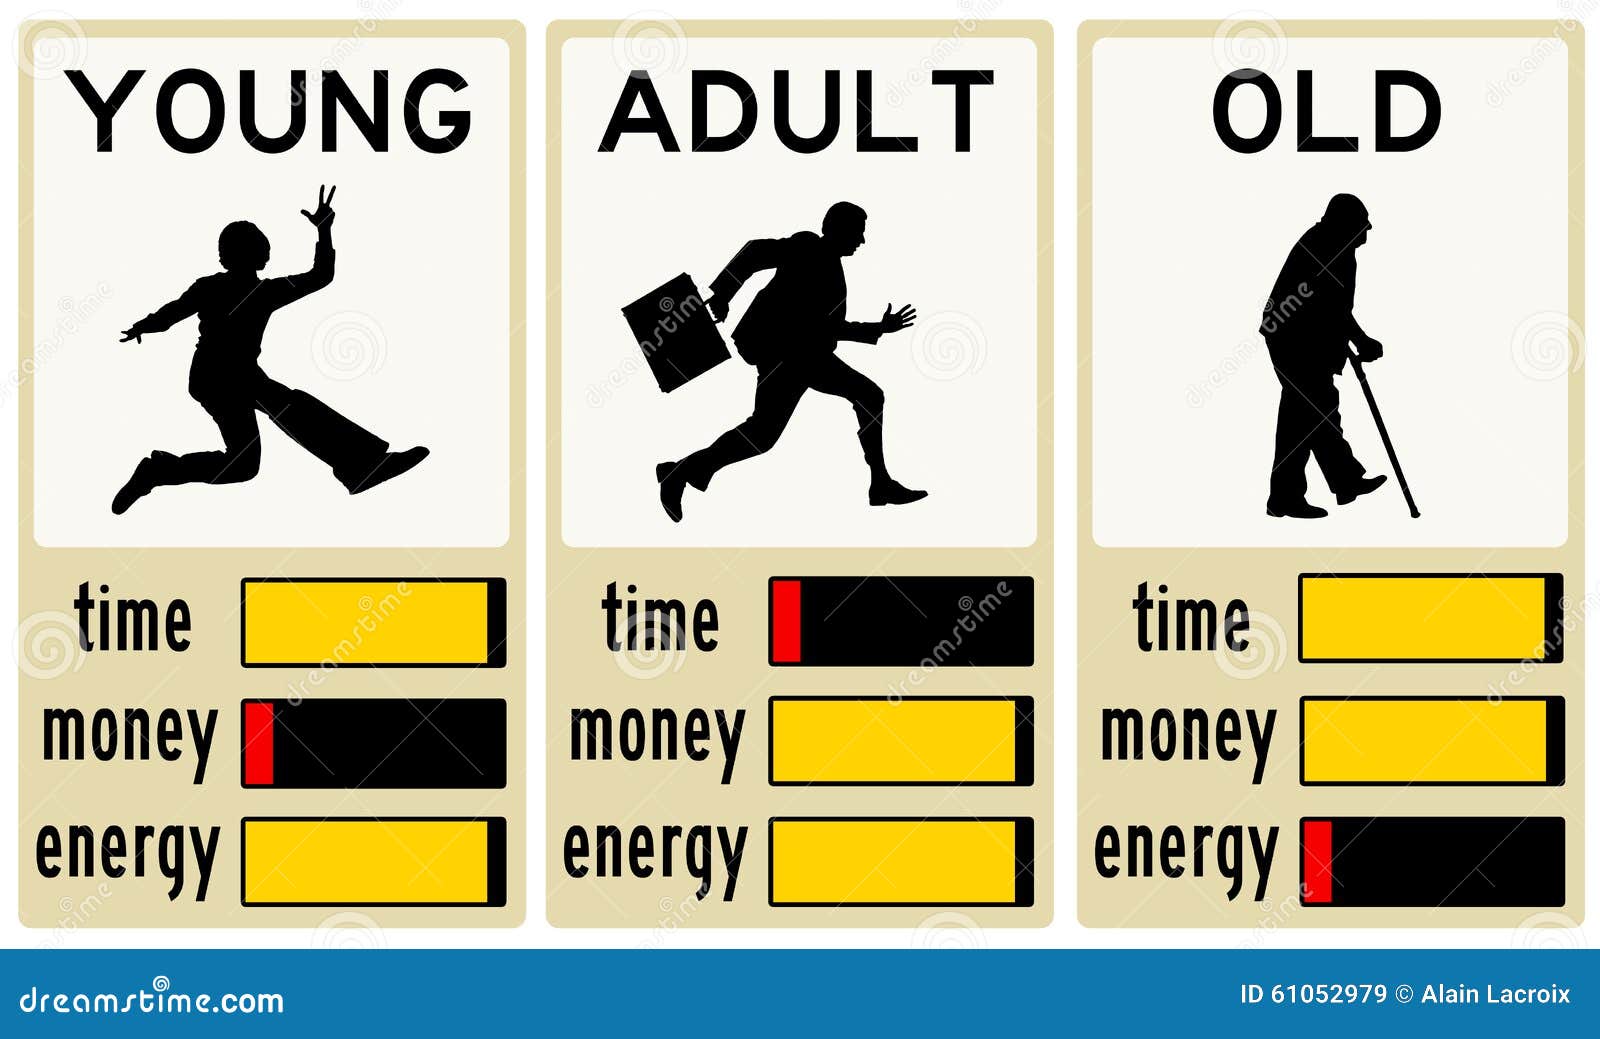 young-adult-old-course-life-regarding-time-money-energy-61052979.jpg